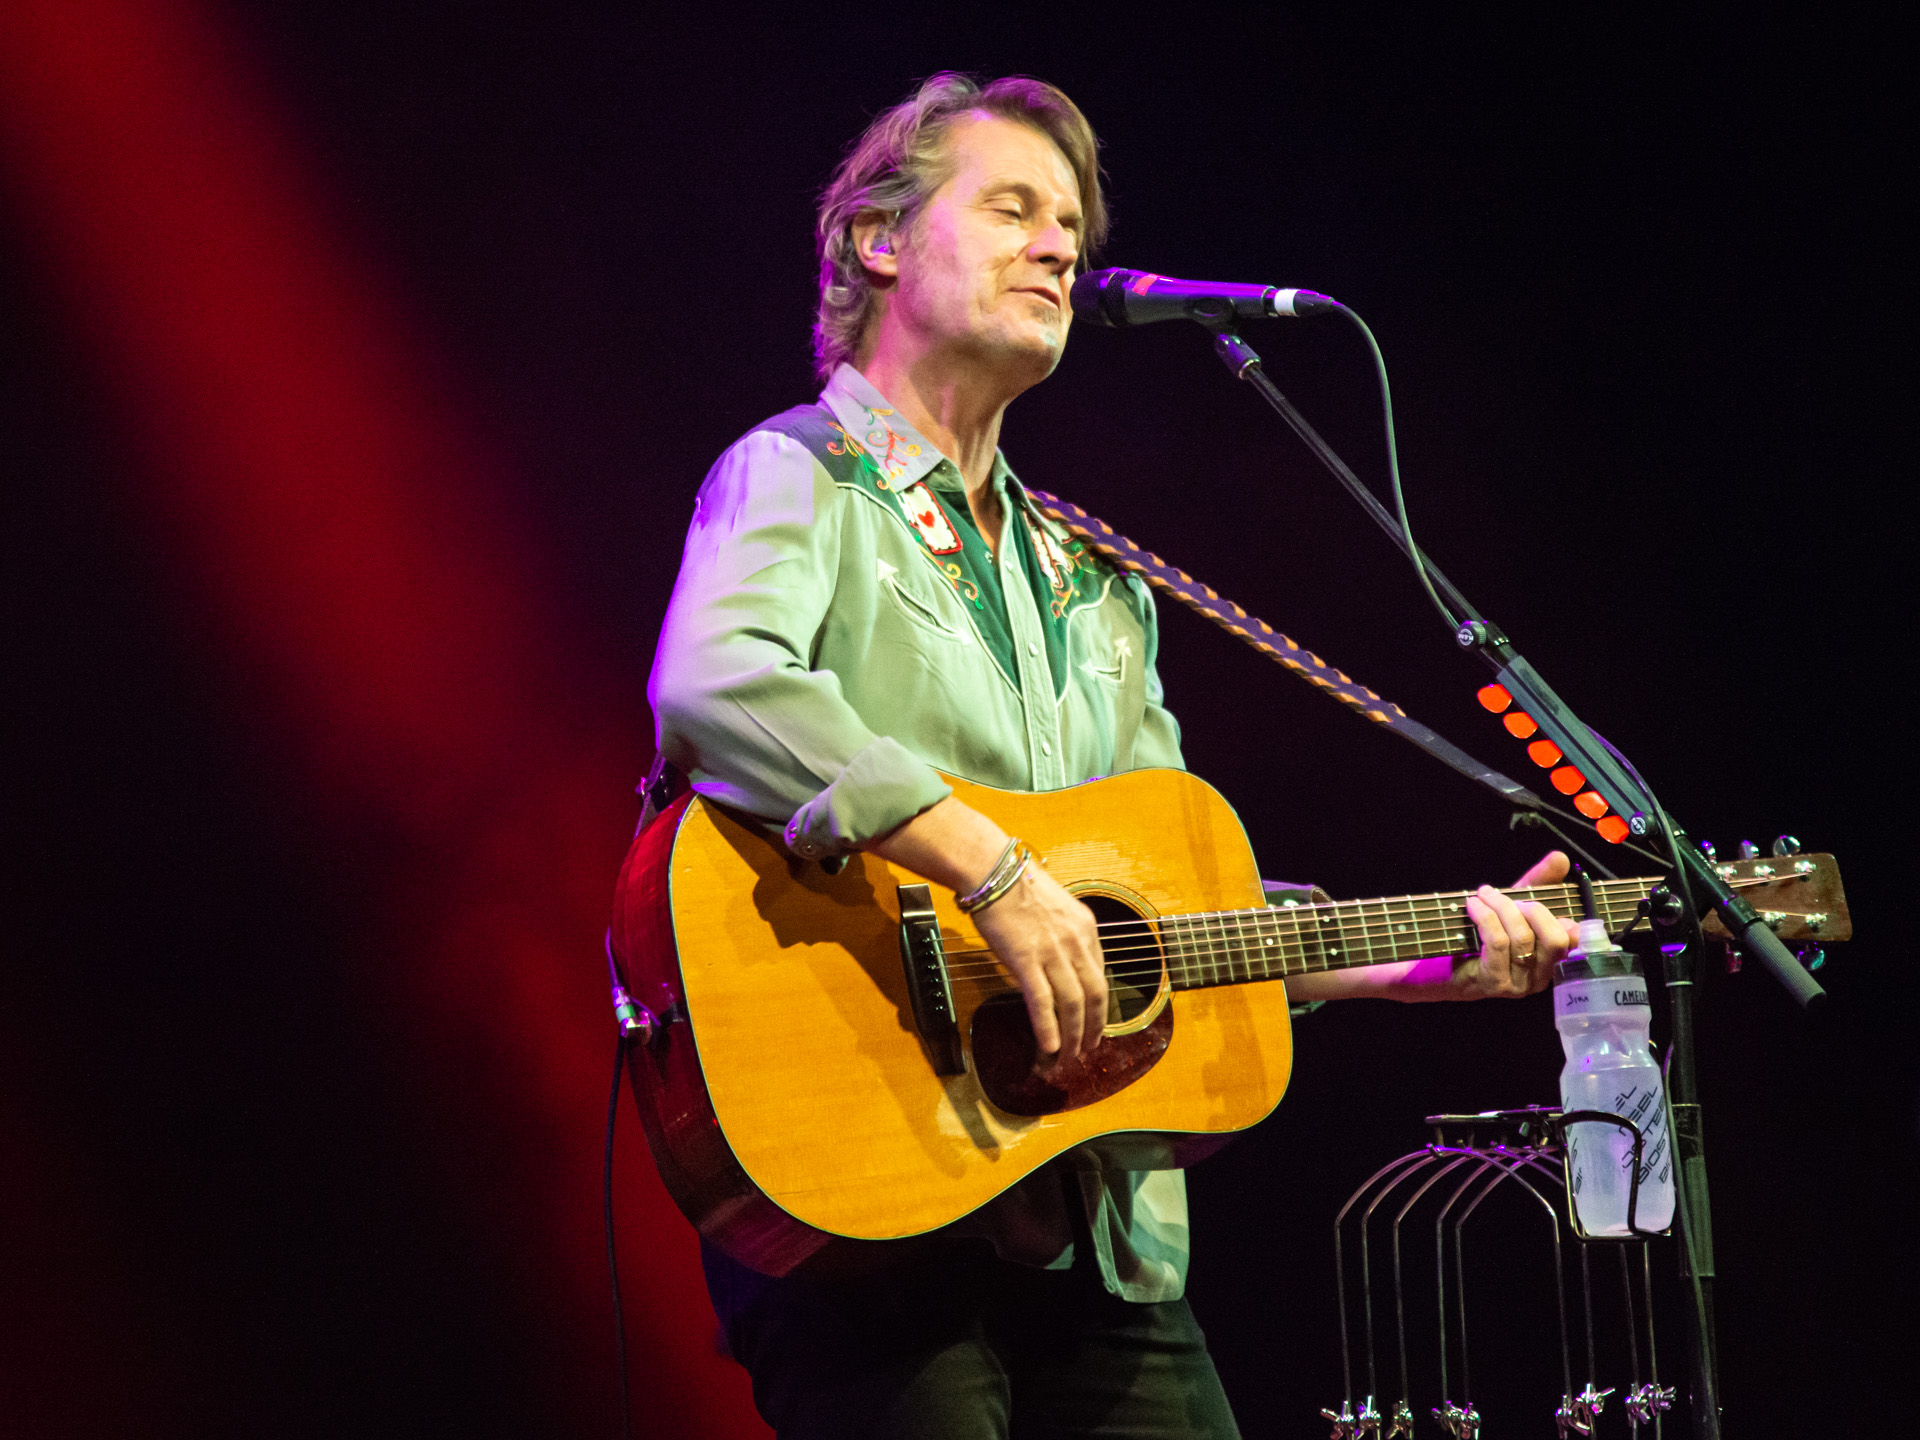 Jim Cuddy commands the stage in a vibrant green collared shirt, singing into the microphone and skillfully playing an acoustic guitar. A red spotlight illuminates him from the back, casting a dramatic aura. Notably, his signature water bottle is attached to the microphone stand, a distinctive touch adding a personal flair to the performance. 